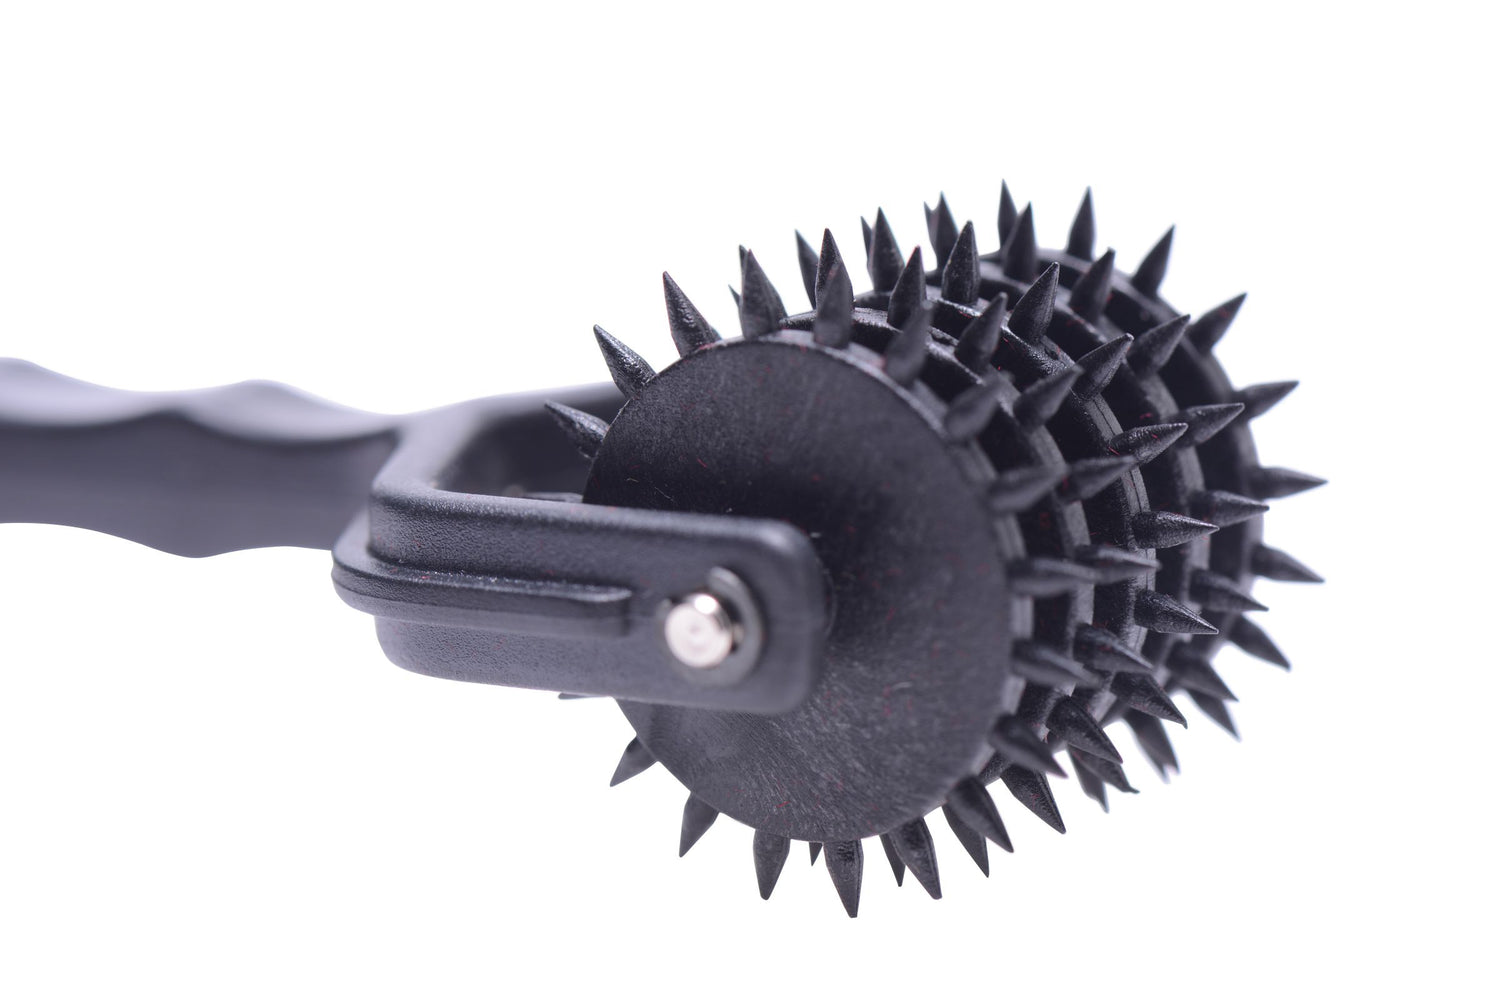 Spiked 5 Row Pinwheel - Just for you desires